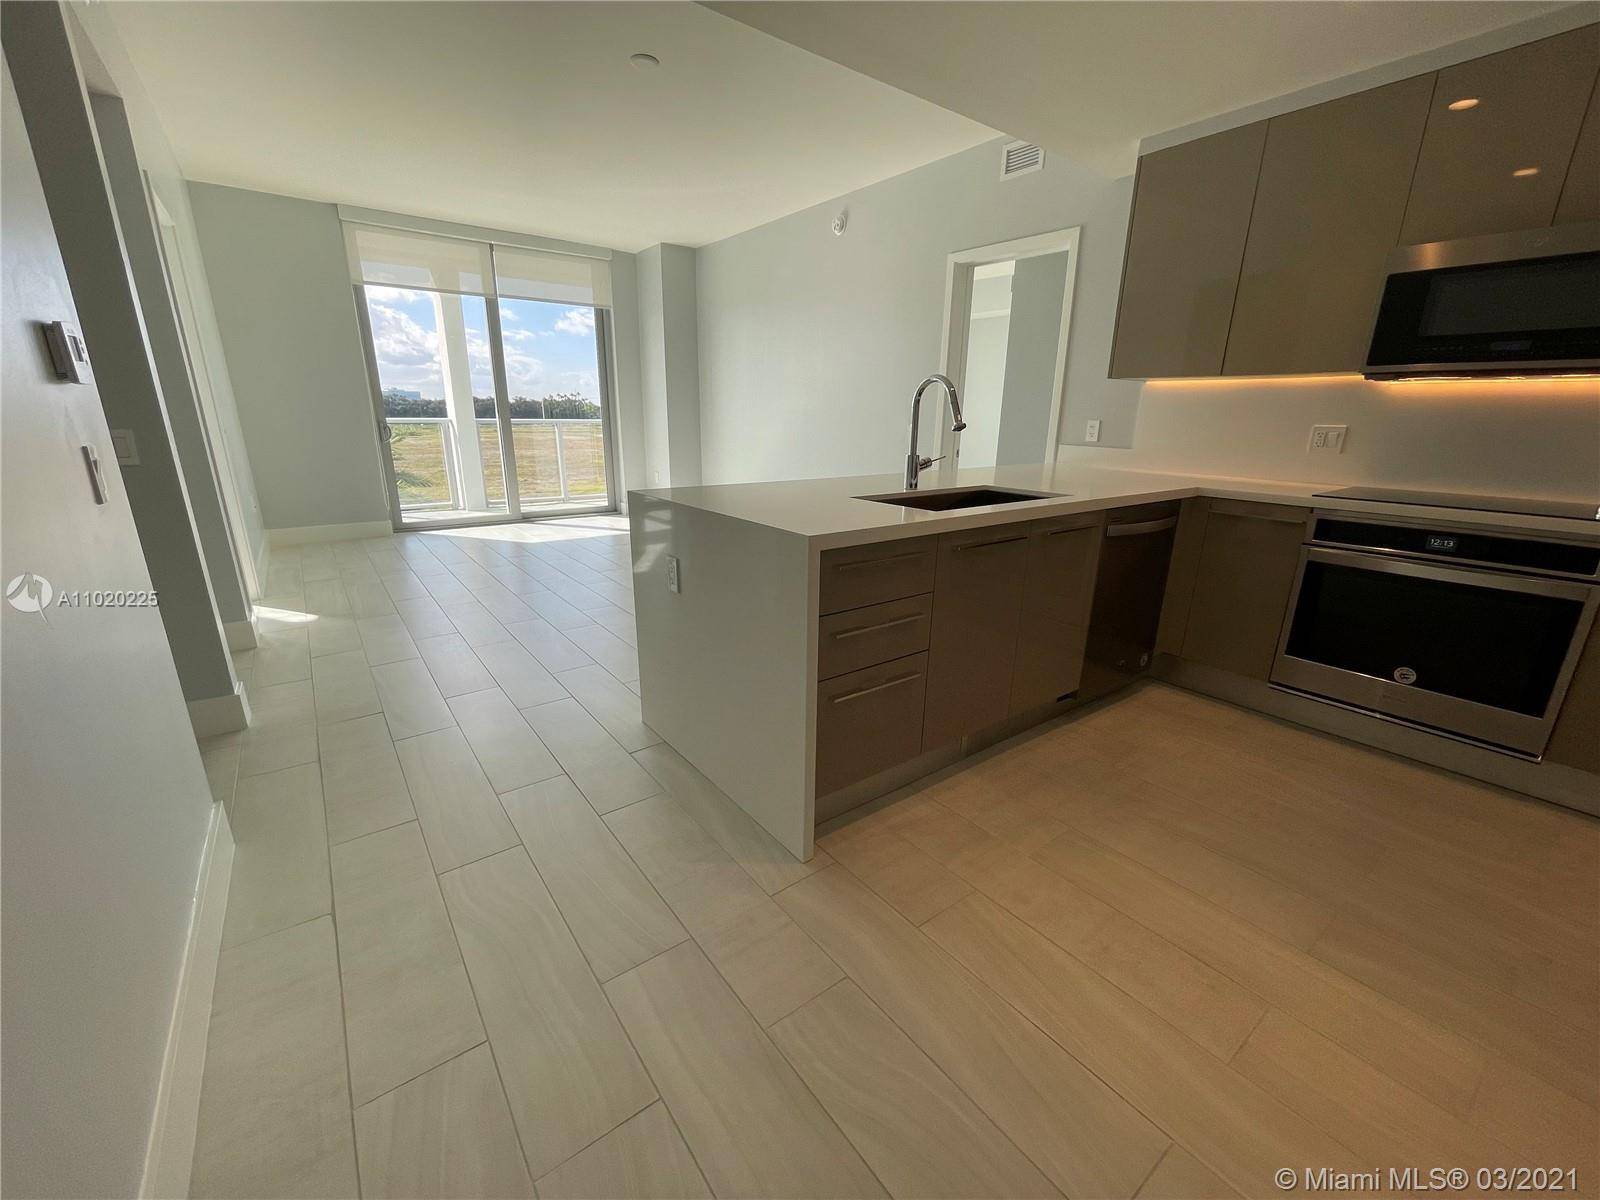 AMAZING unit at Metropica, brand new building, unit with shades and blackouts, Cozi 2 Bed 2 bath, ready to move in.